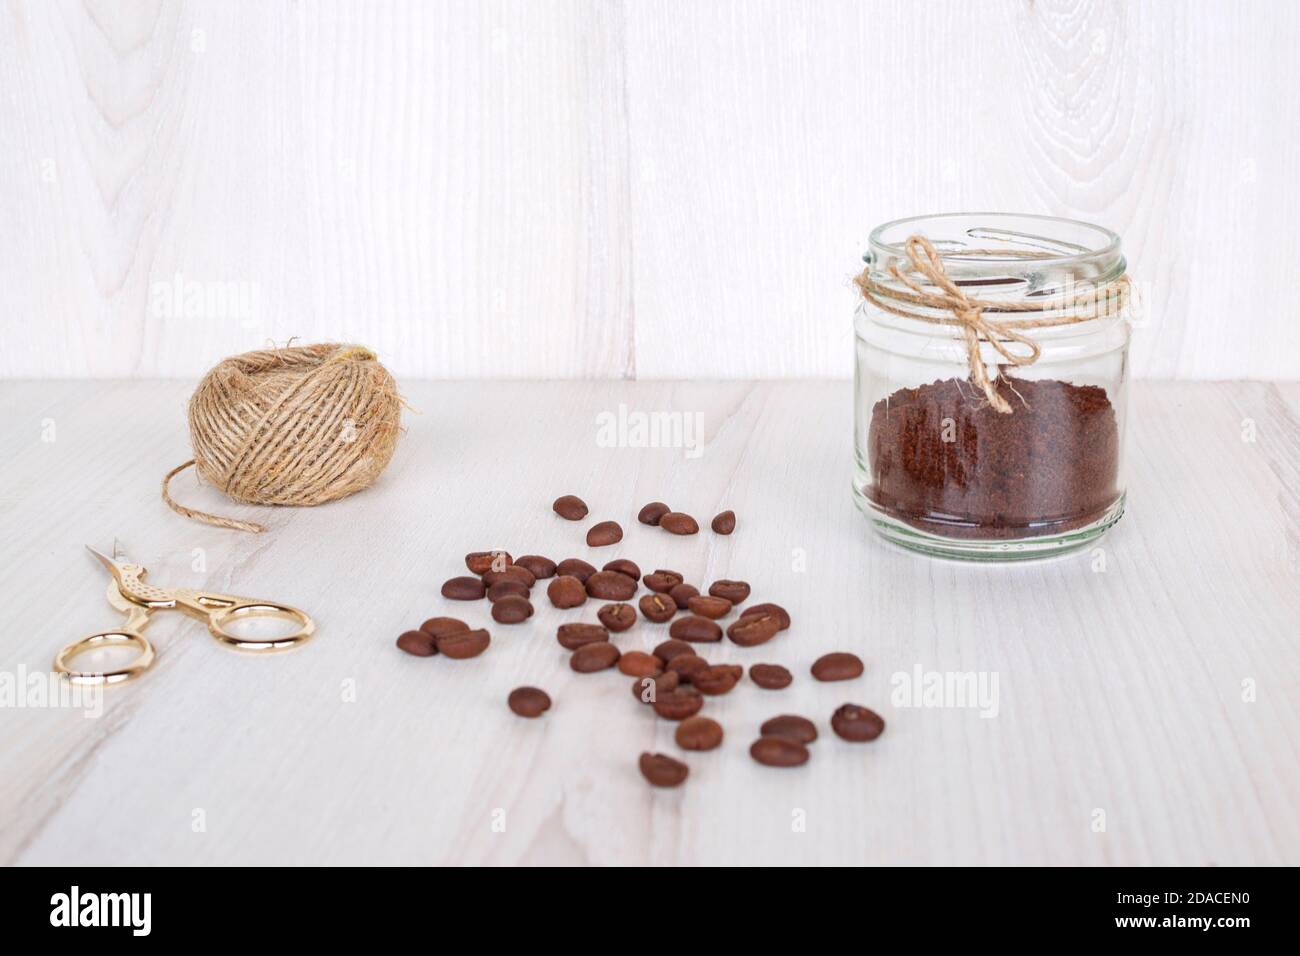 Ground coffee in a small glass jar decorated with jute thread. Concept of hand made natural air freshener. Stock Photo